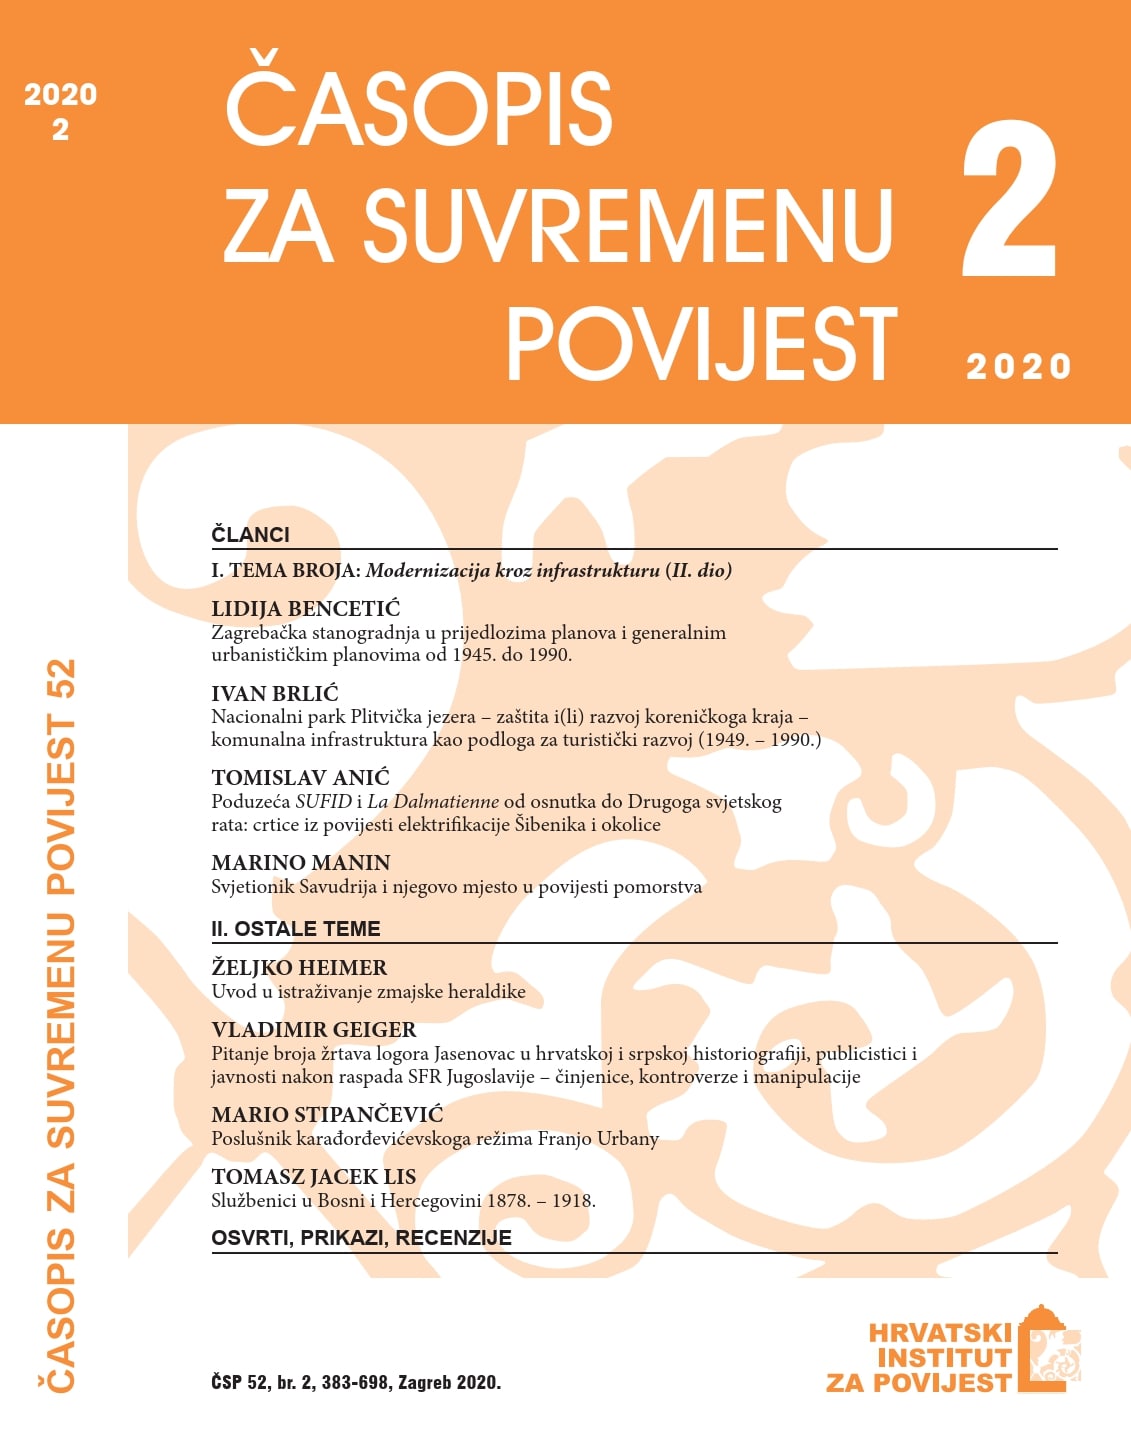 The Issue of the Number of Jasenovac Camp Victims in Croatian and Serbian Historiography, Opinion Journalism, and Public Discourse after the Disintegration of the Socialist Federal Republic of Yugoslavia – Facts, Controversies, and Manipulations Cover Image